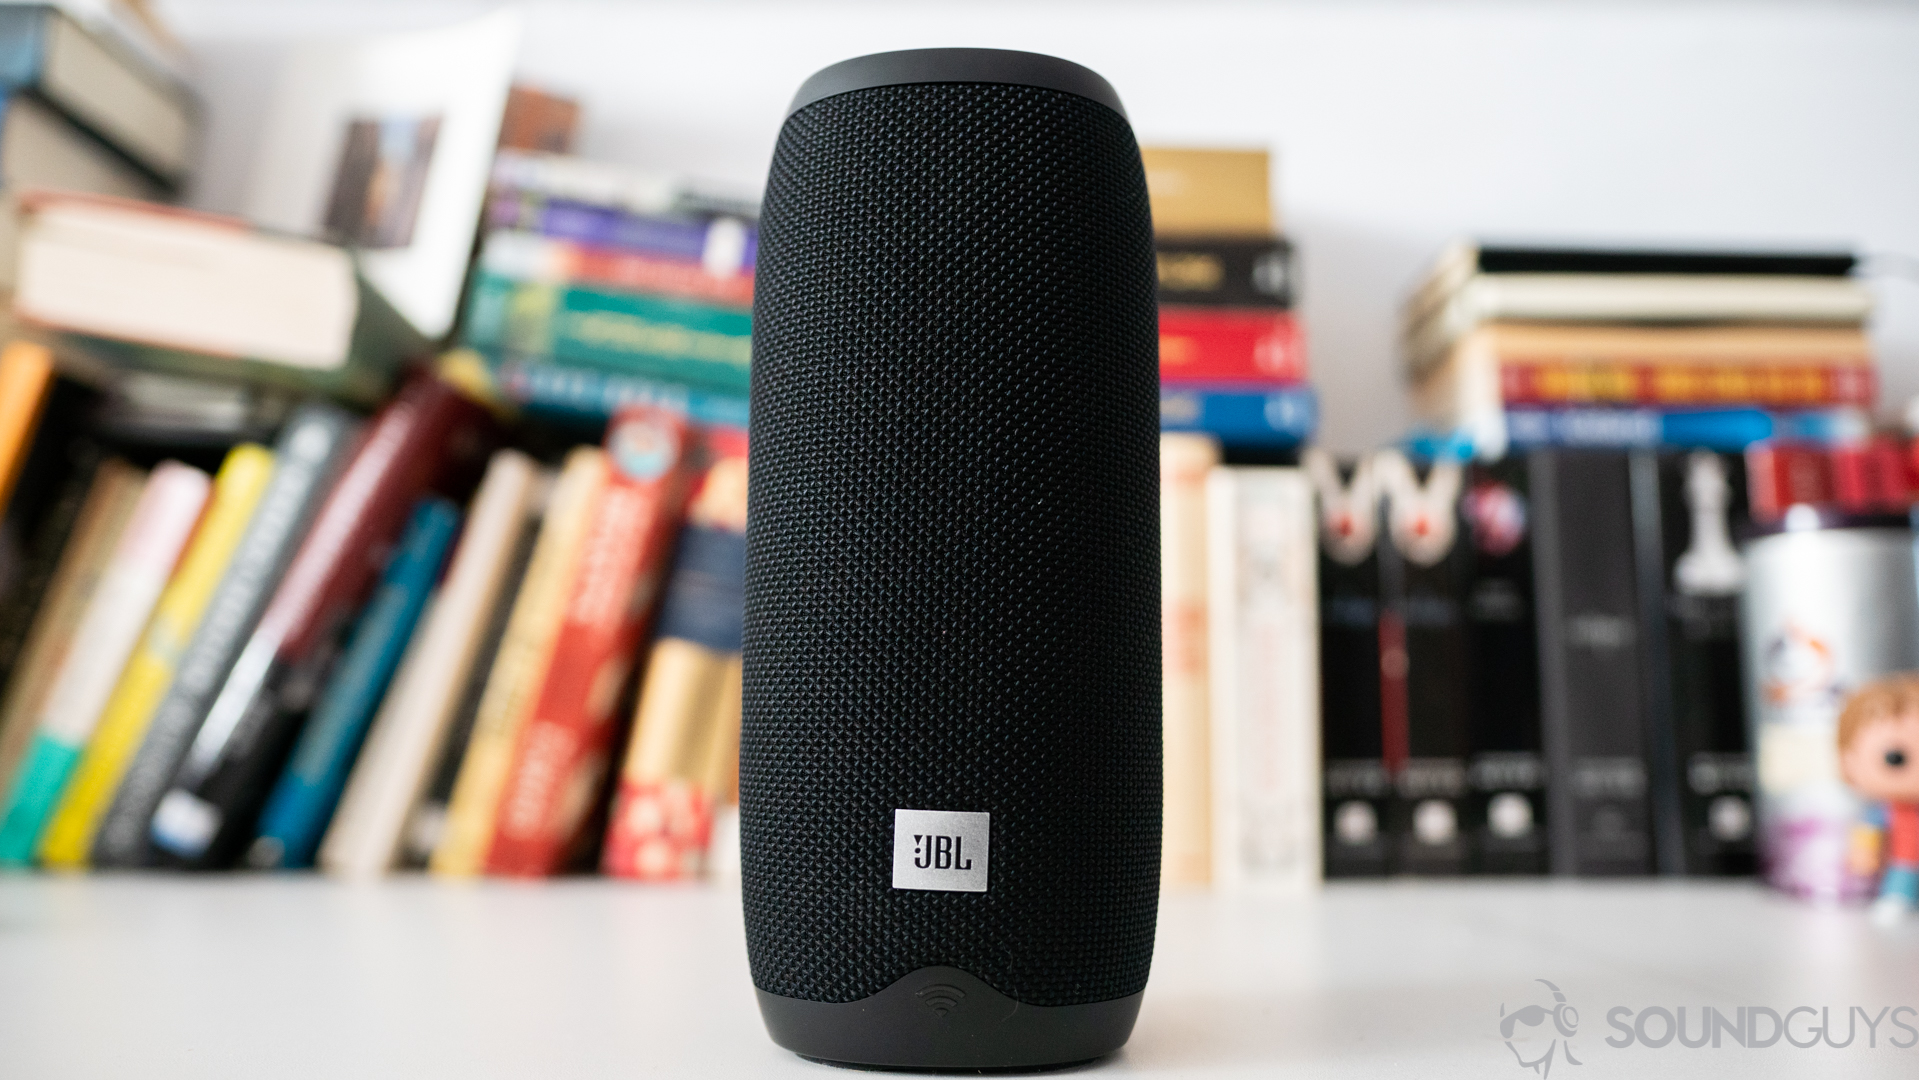 JBL Link Speakers Review: Now With Google Assistant